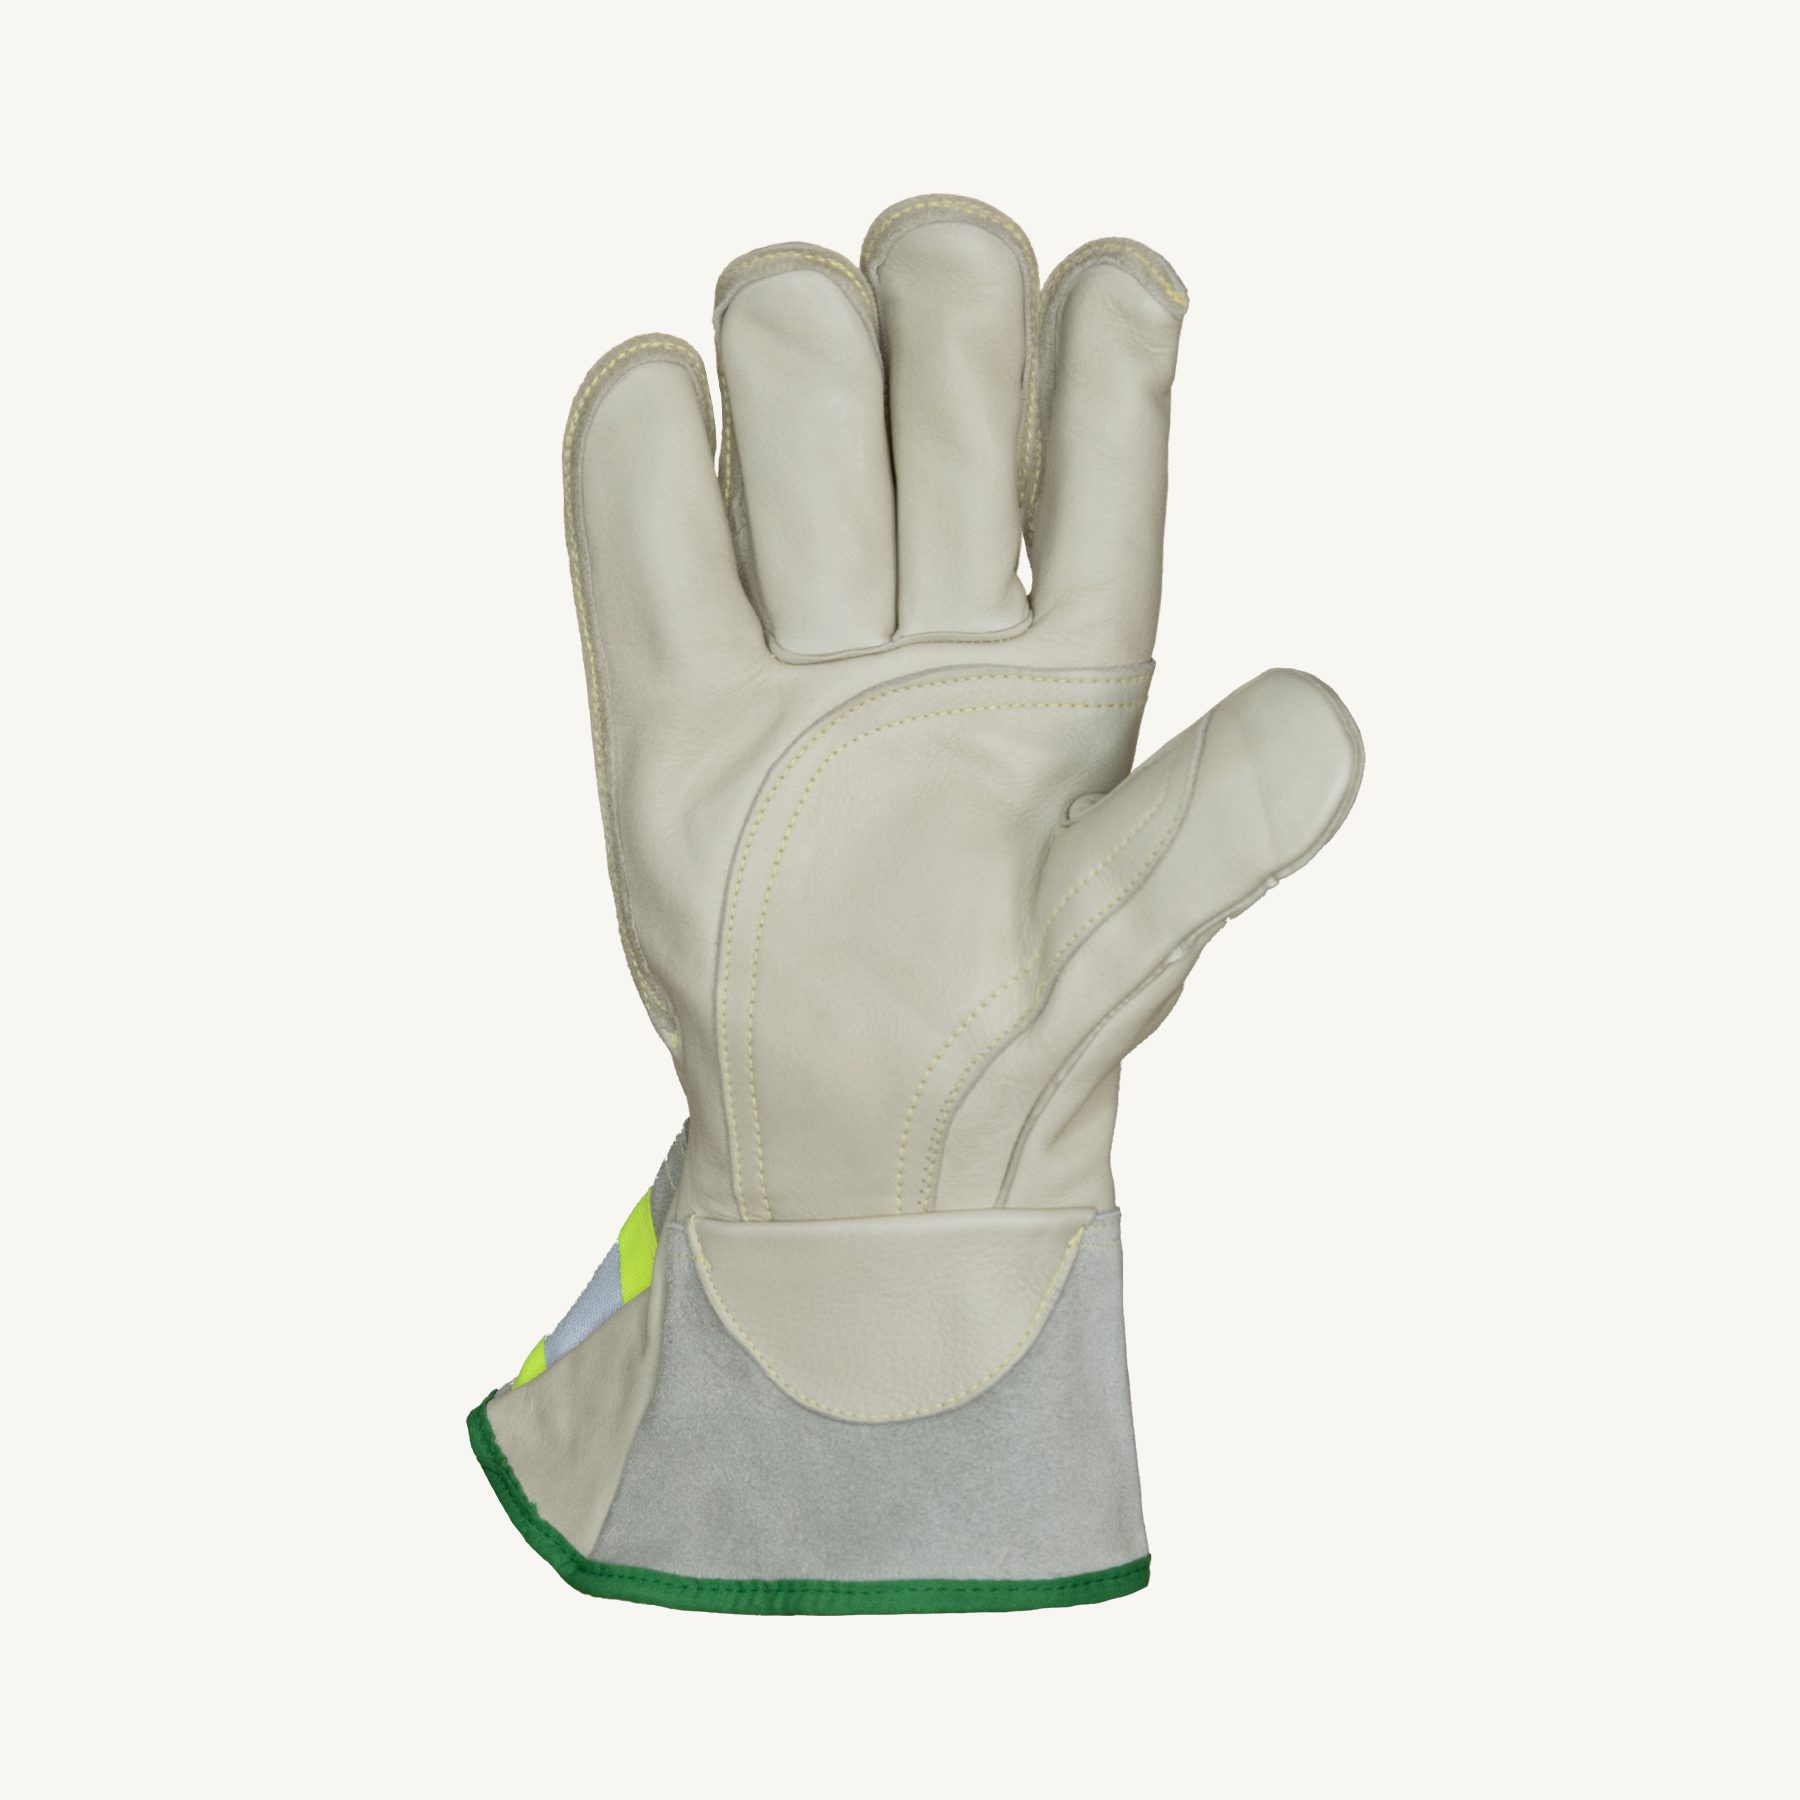 CustomGrips By SISO Safety Cut Resistant Work Gloves, Superior Grip Wet &  Dry [Large,12 Pairs] 